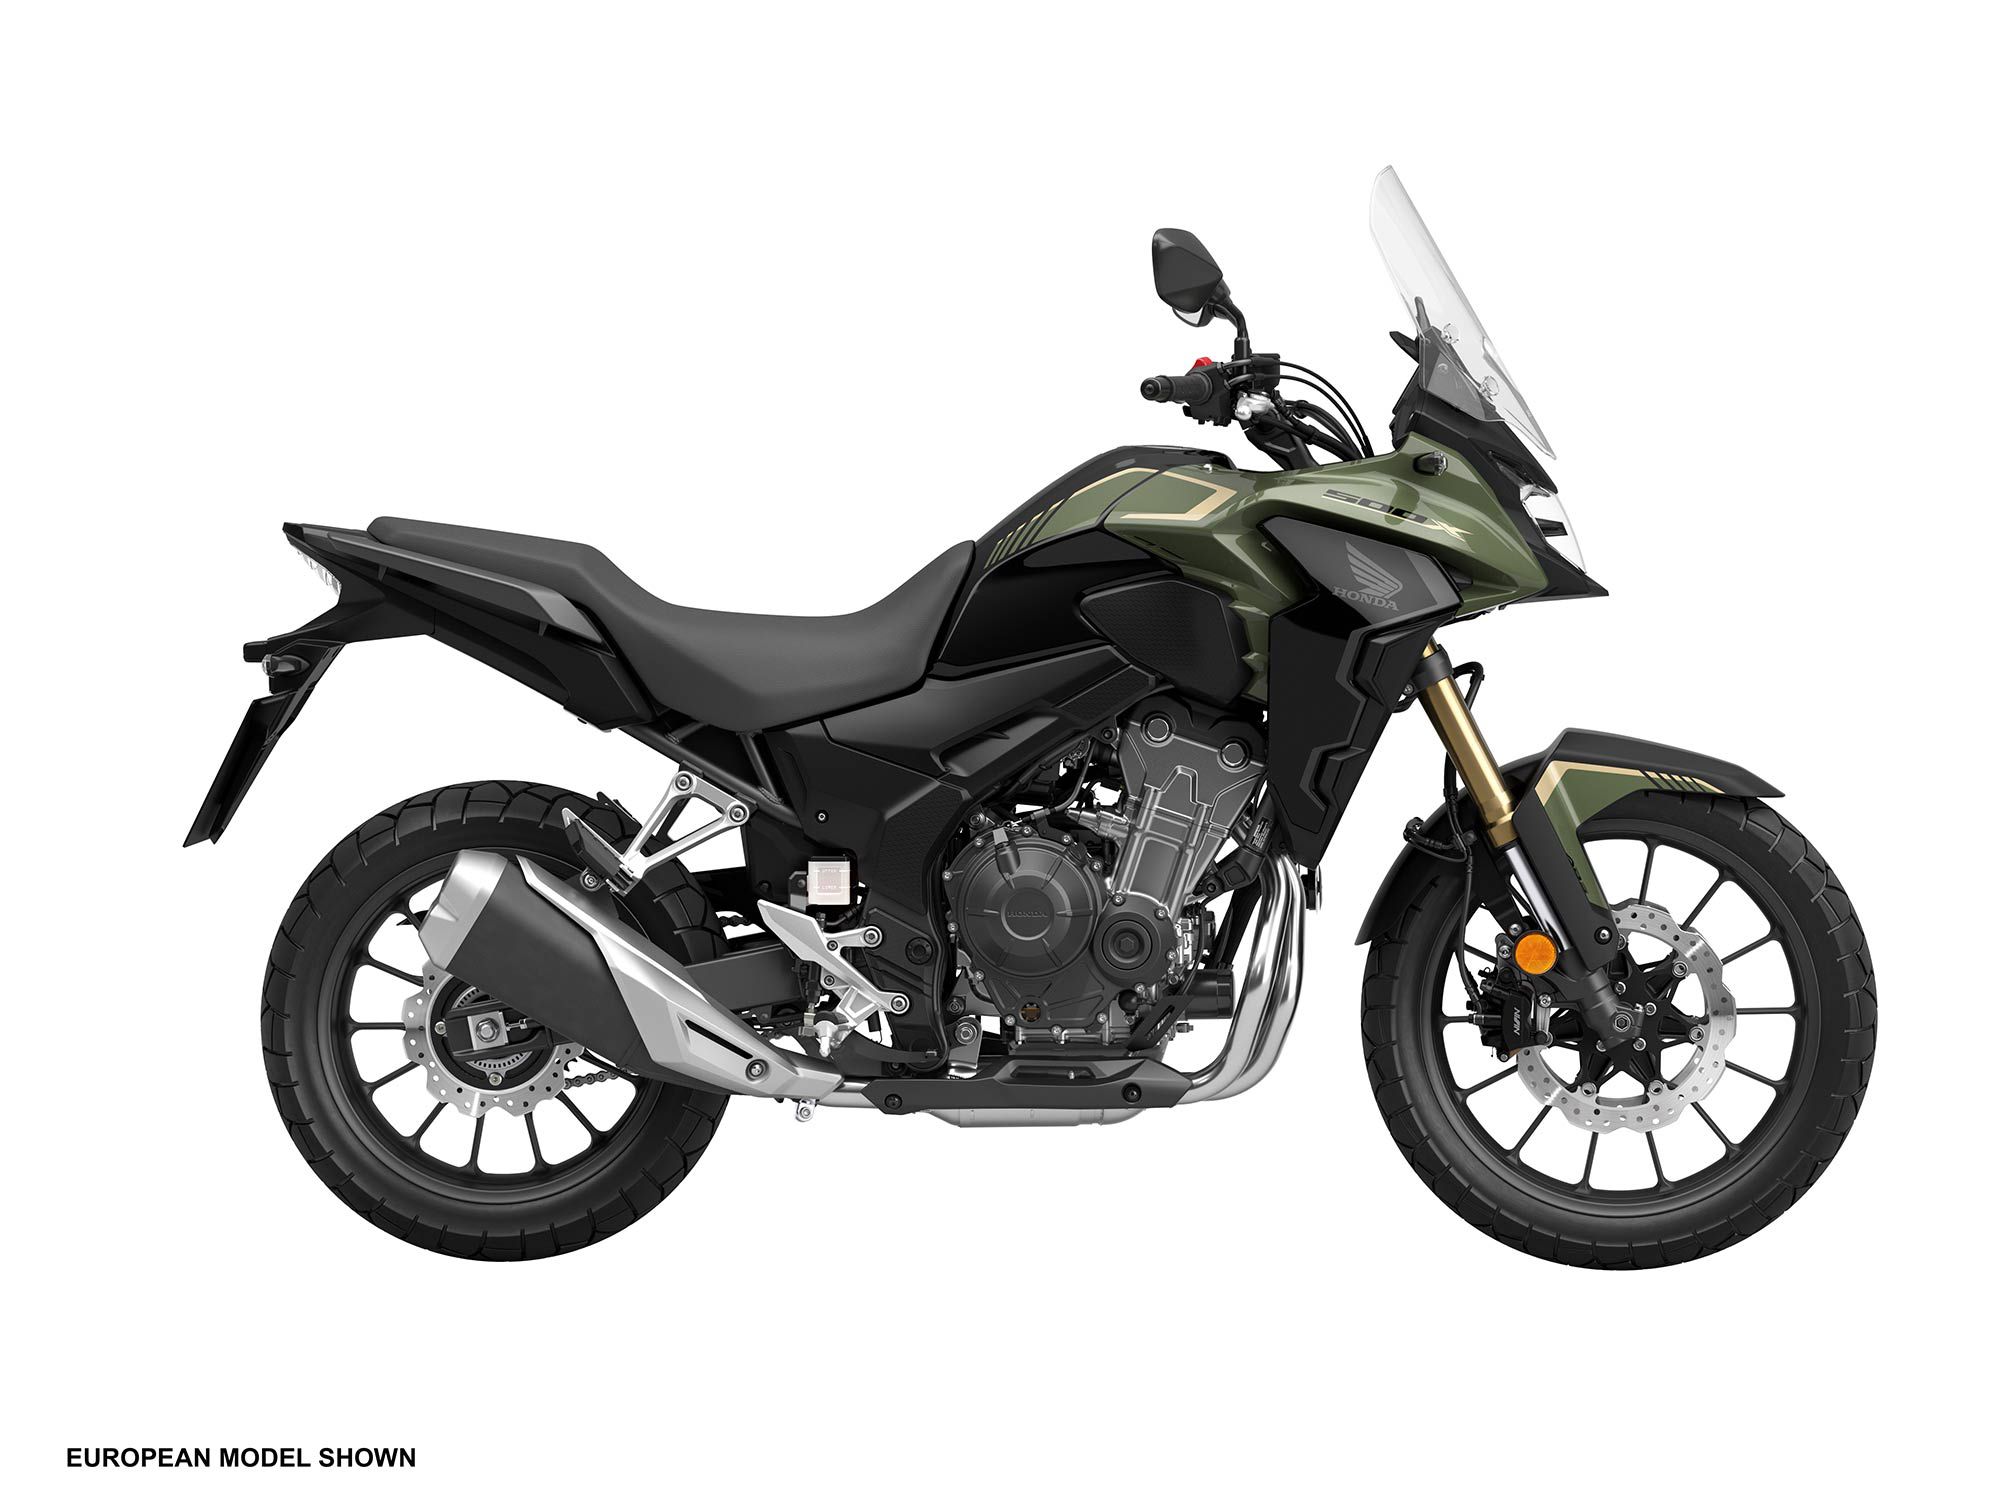 The CB500X will start at $7,199.